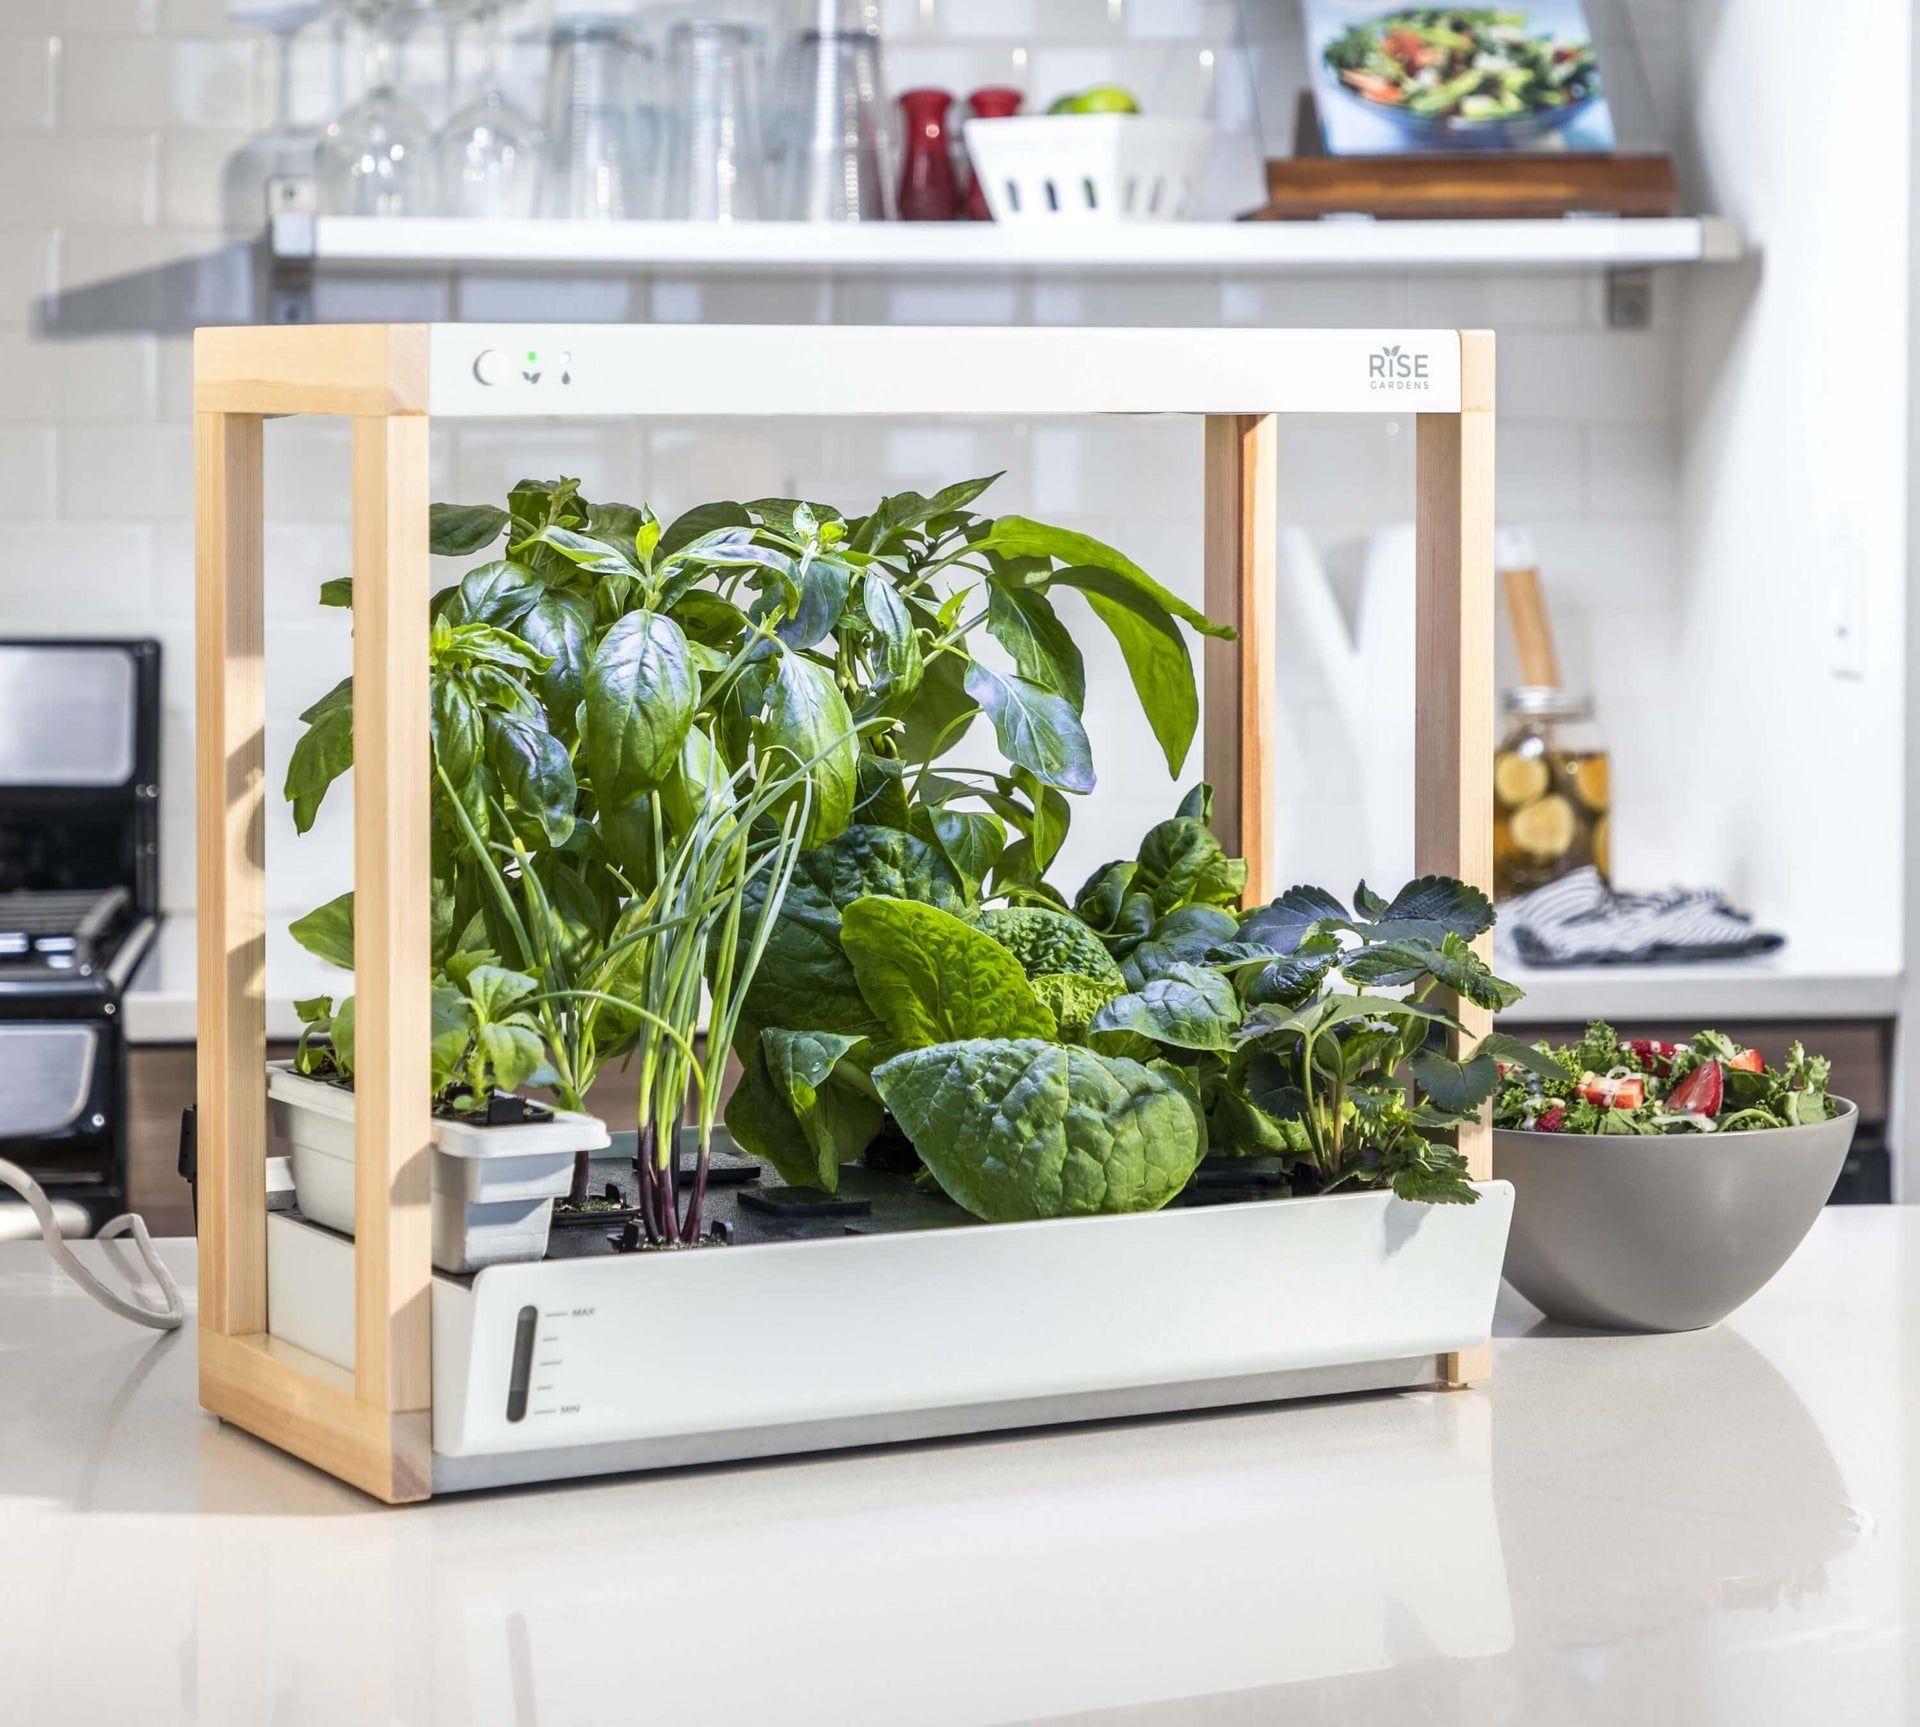 Are Indoor Hydroponic Gardens Worth It